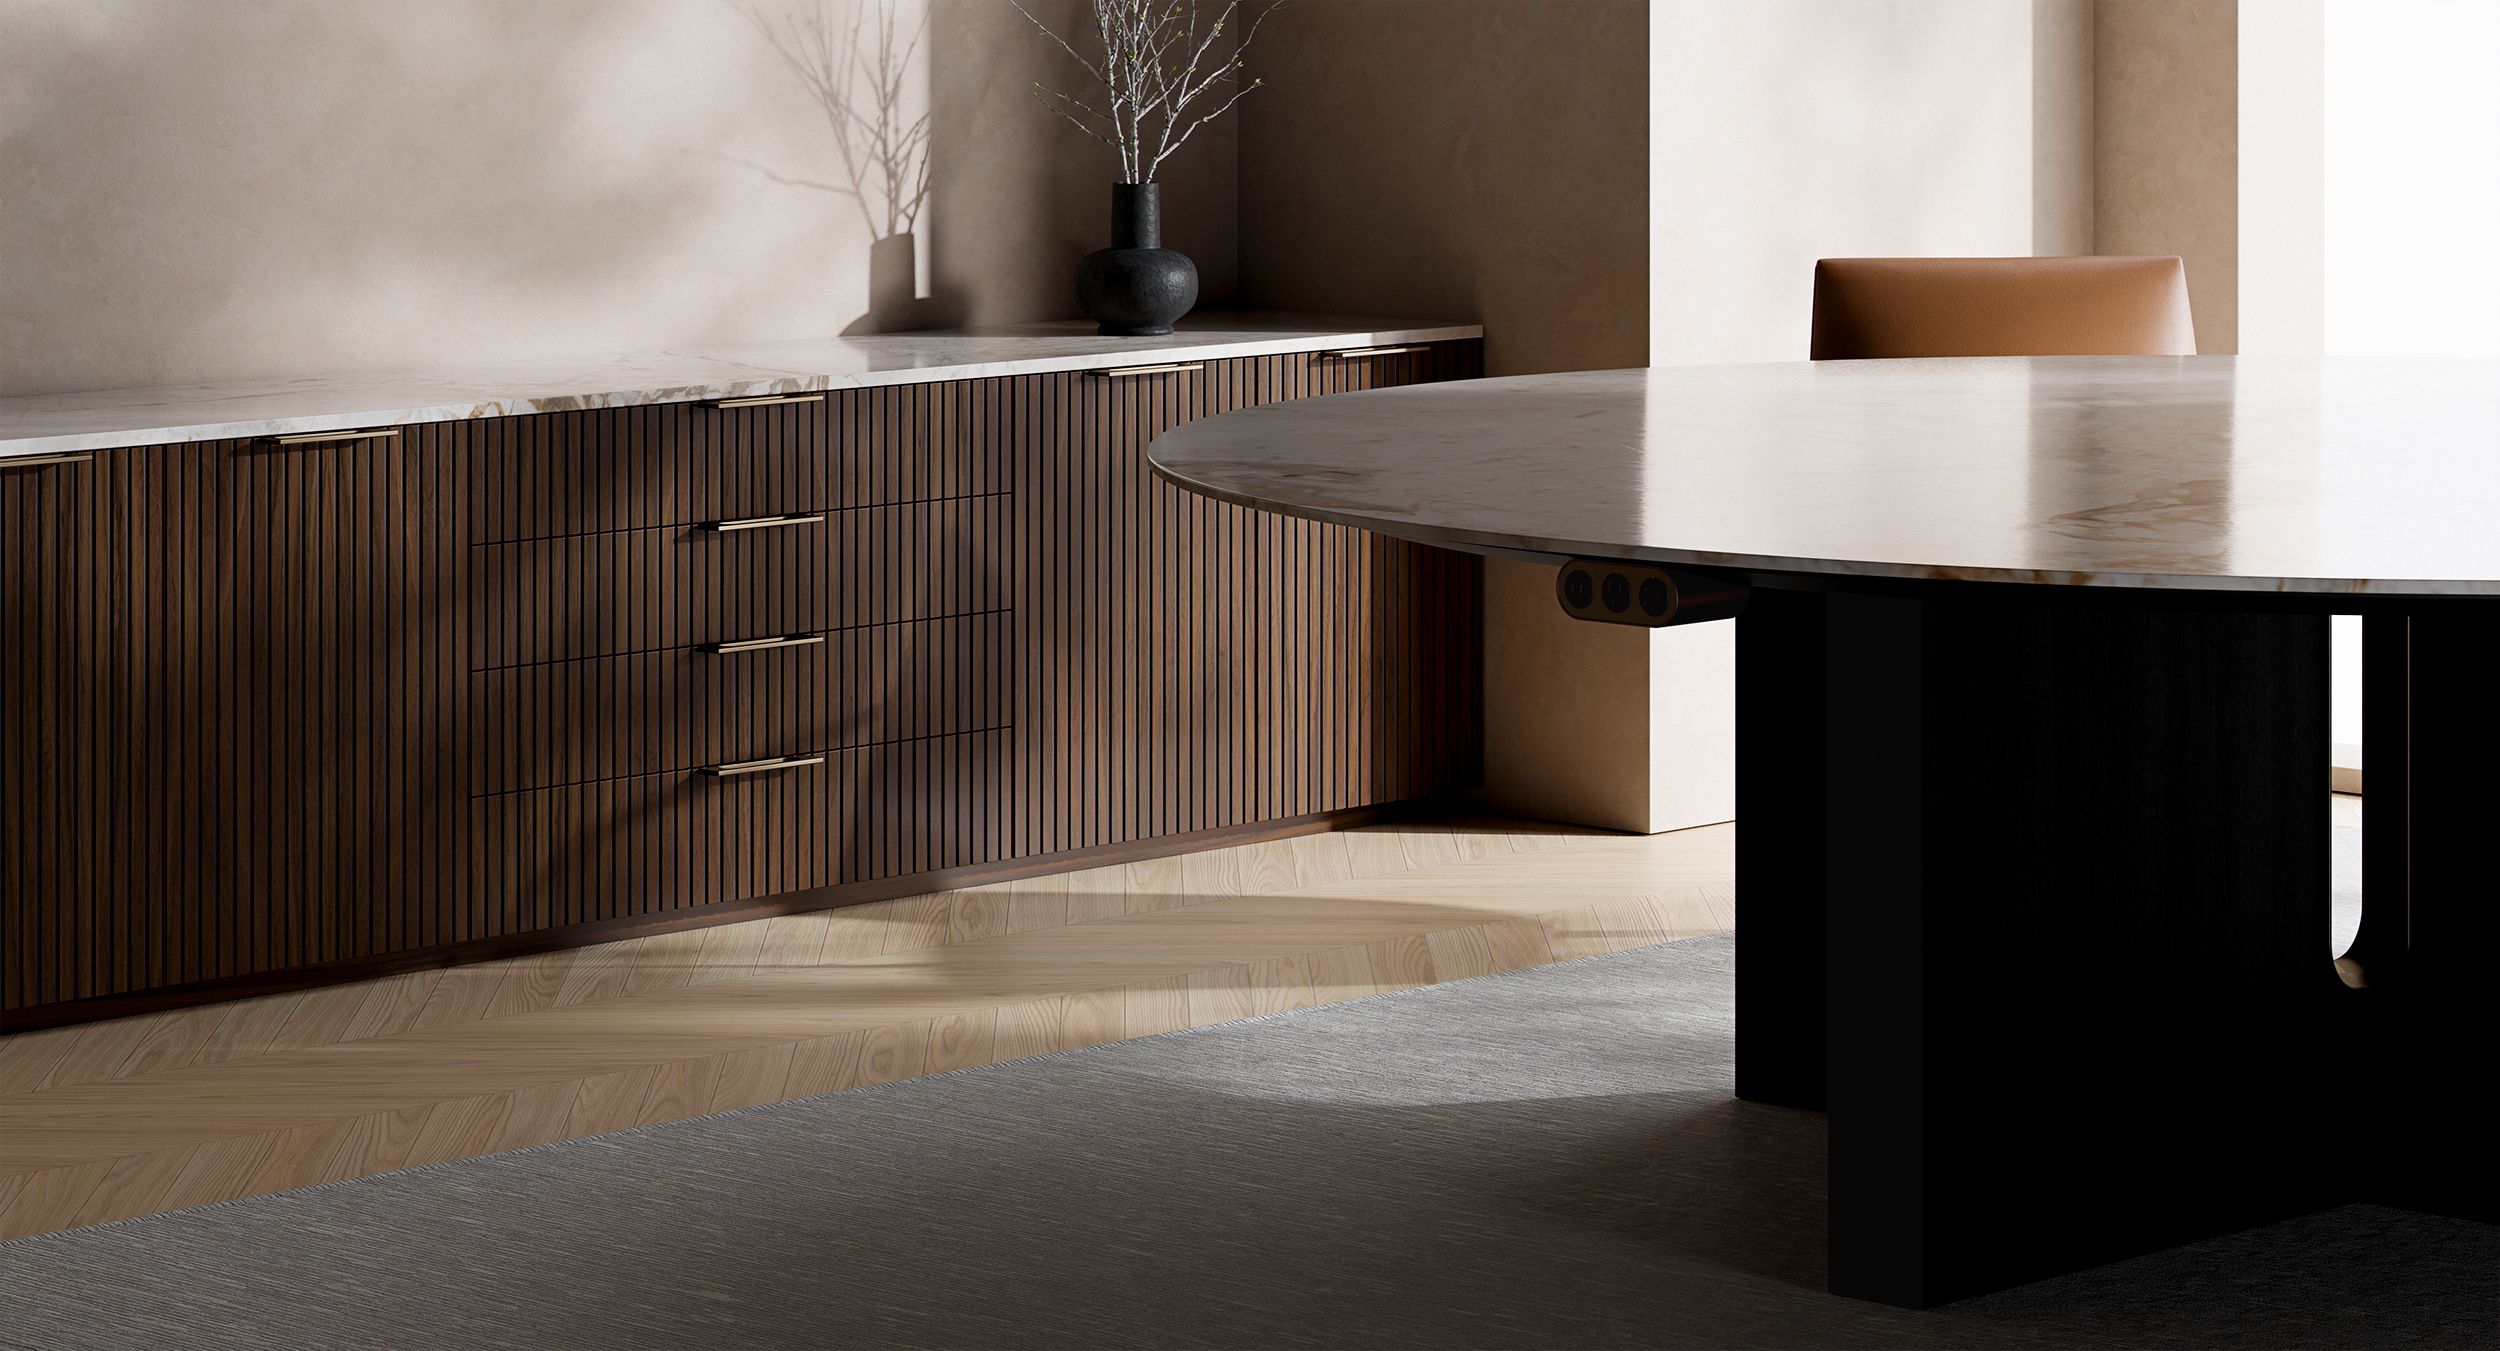 With elegant, Scandinavian-inspired lines, FREYA brings a luxurious sense of purpose to meeting spaces of any size.